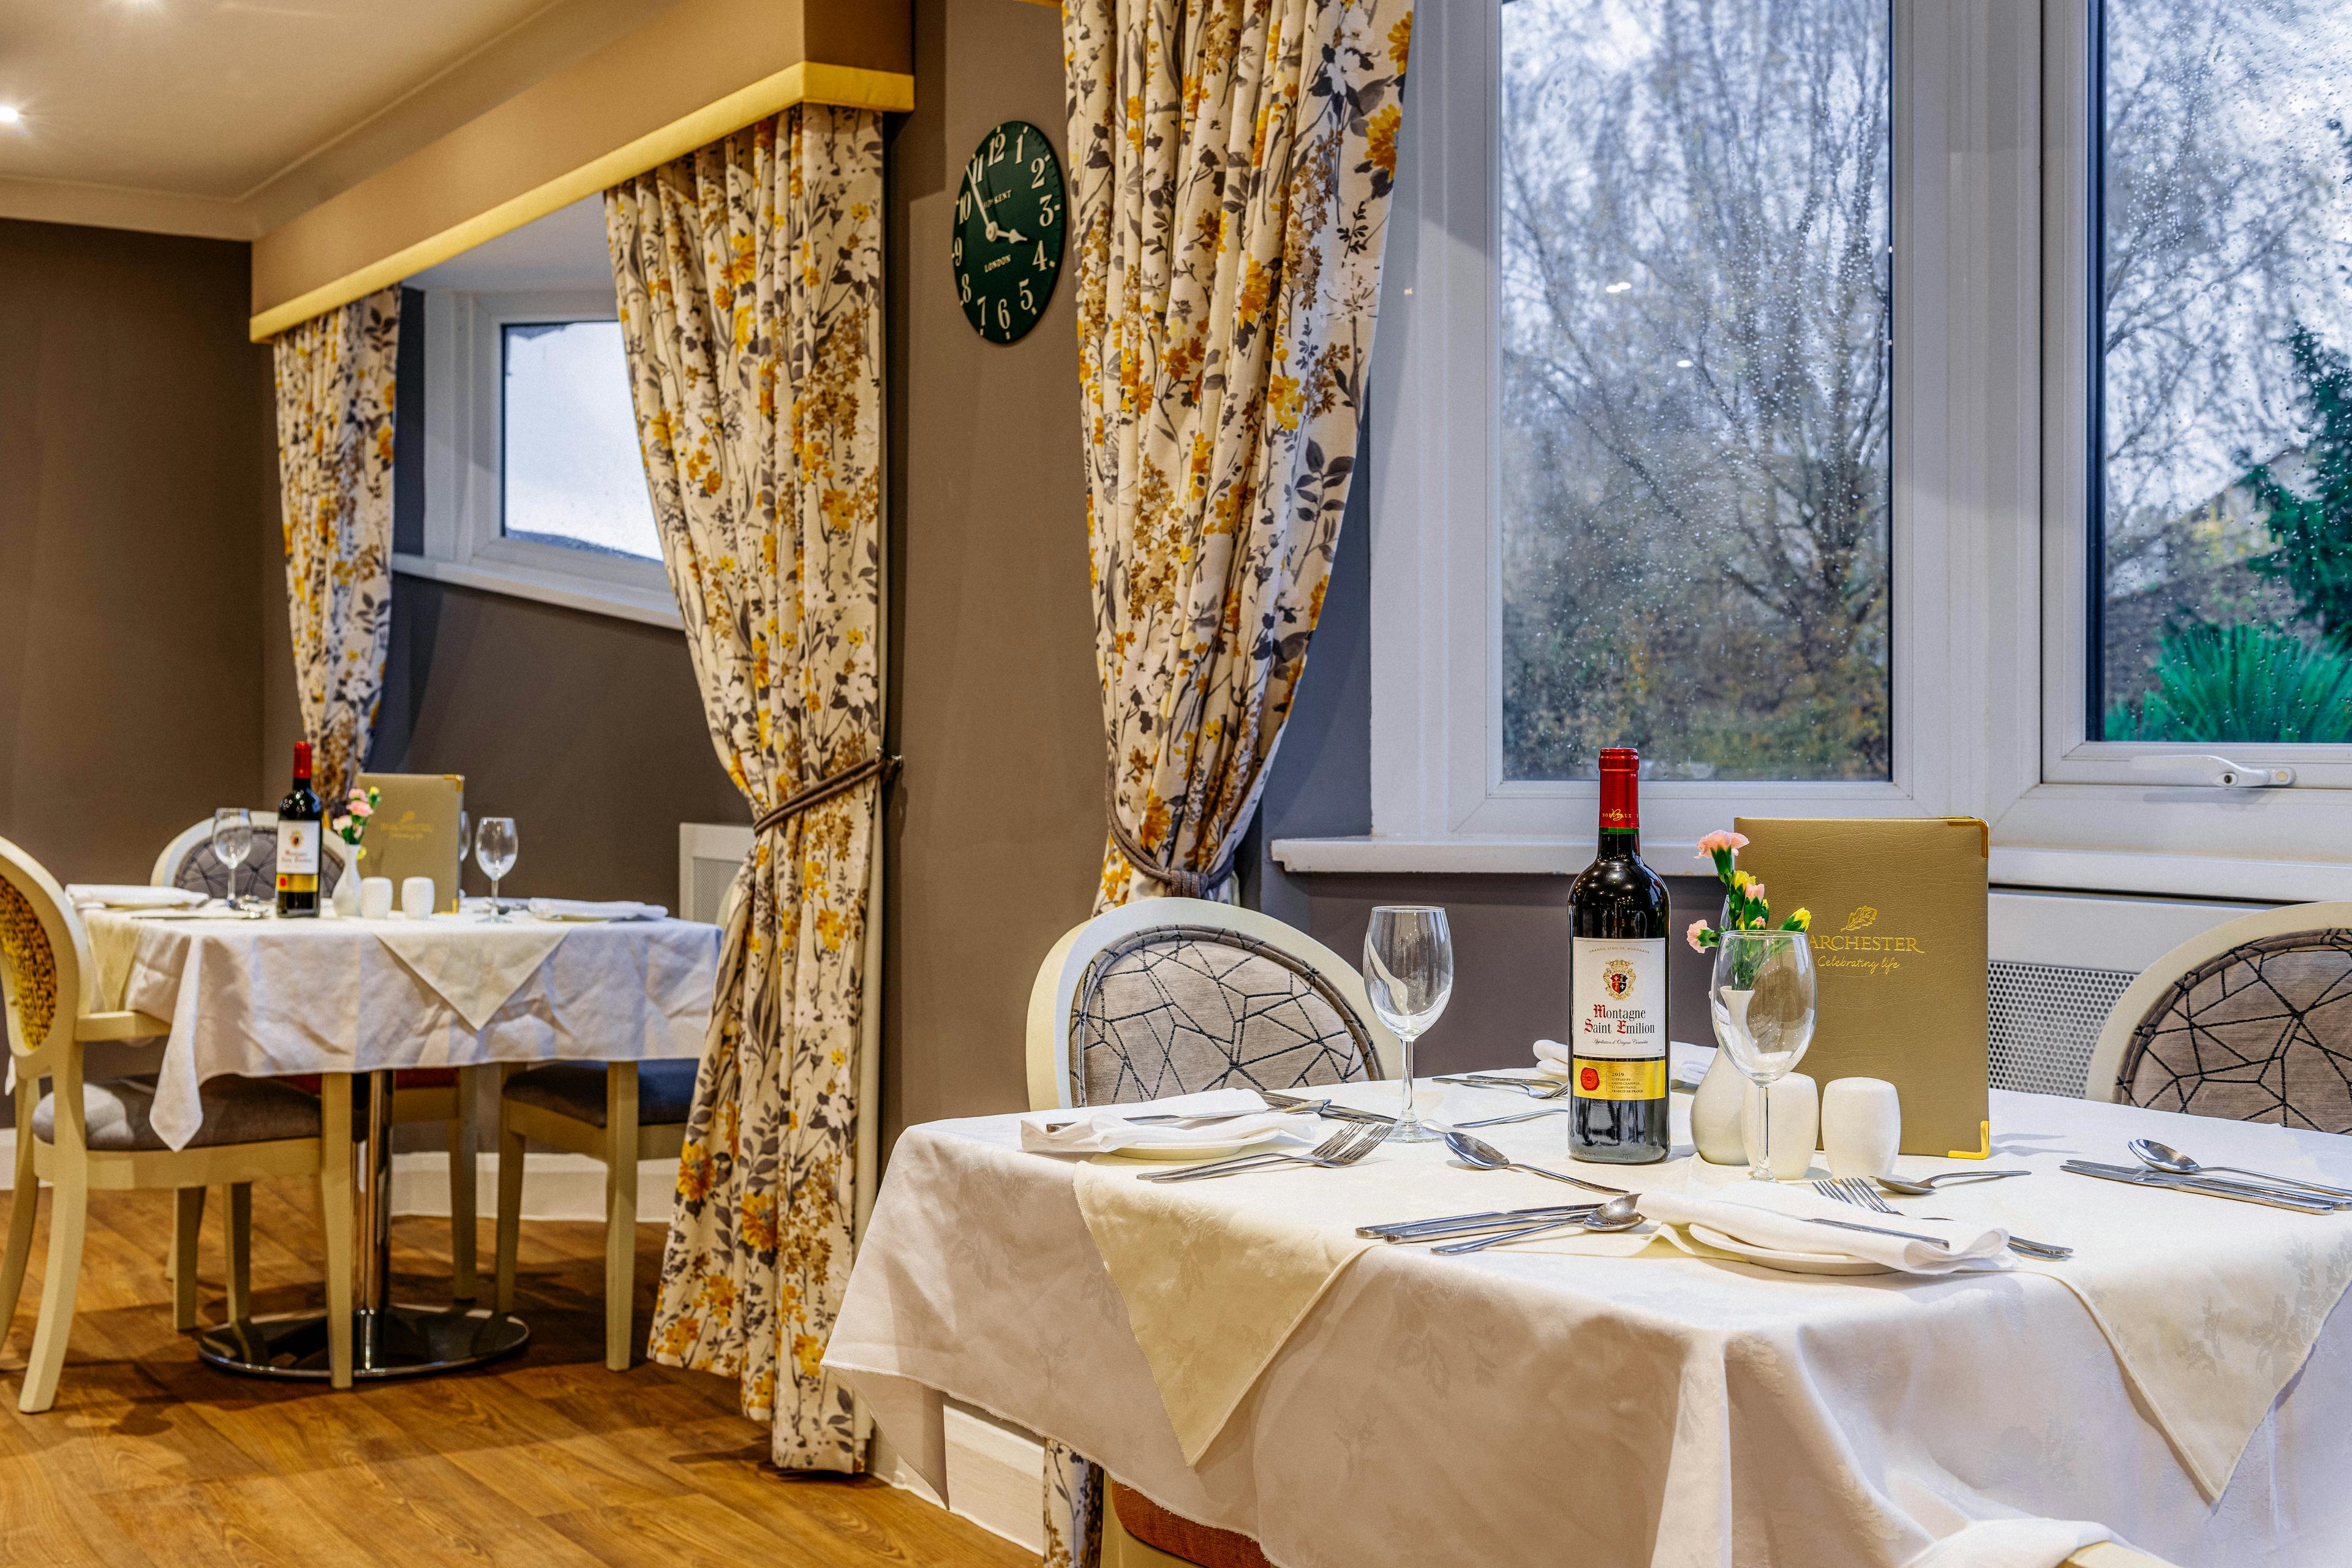 Dining Room at Sherwood Court Care Home in Fulwood, Preston